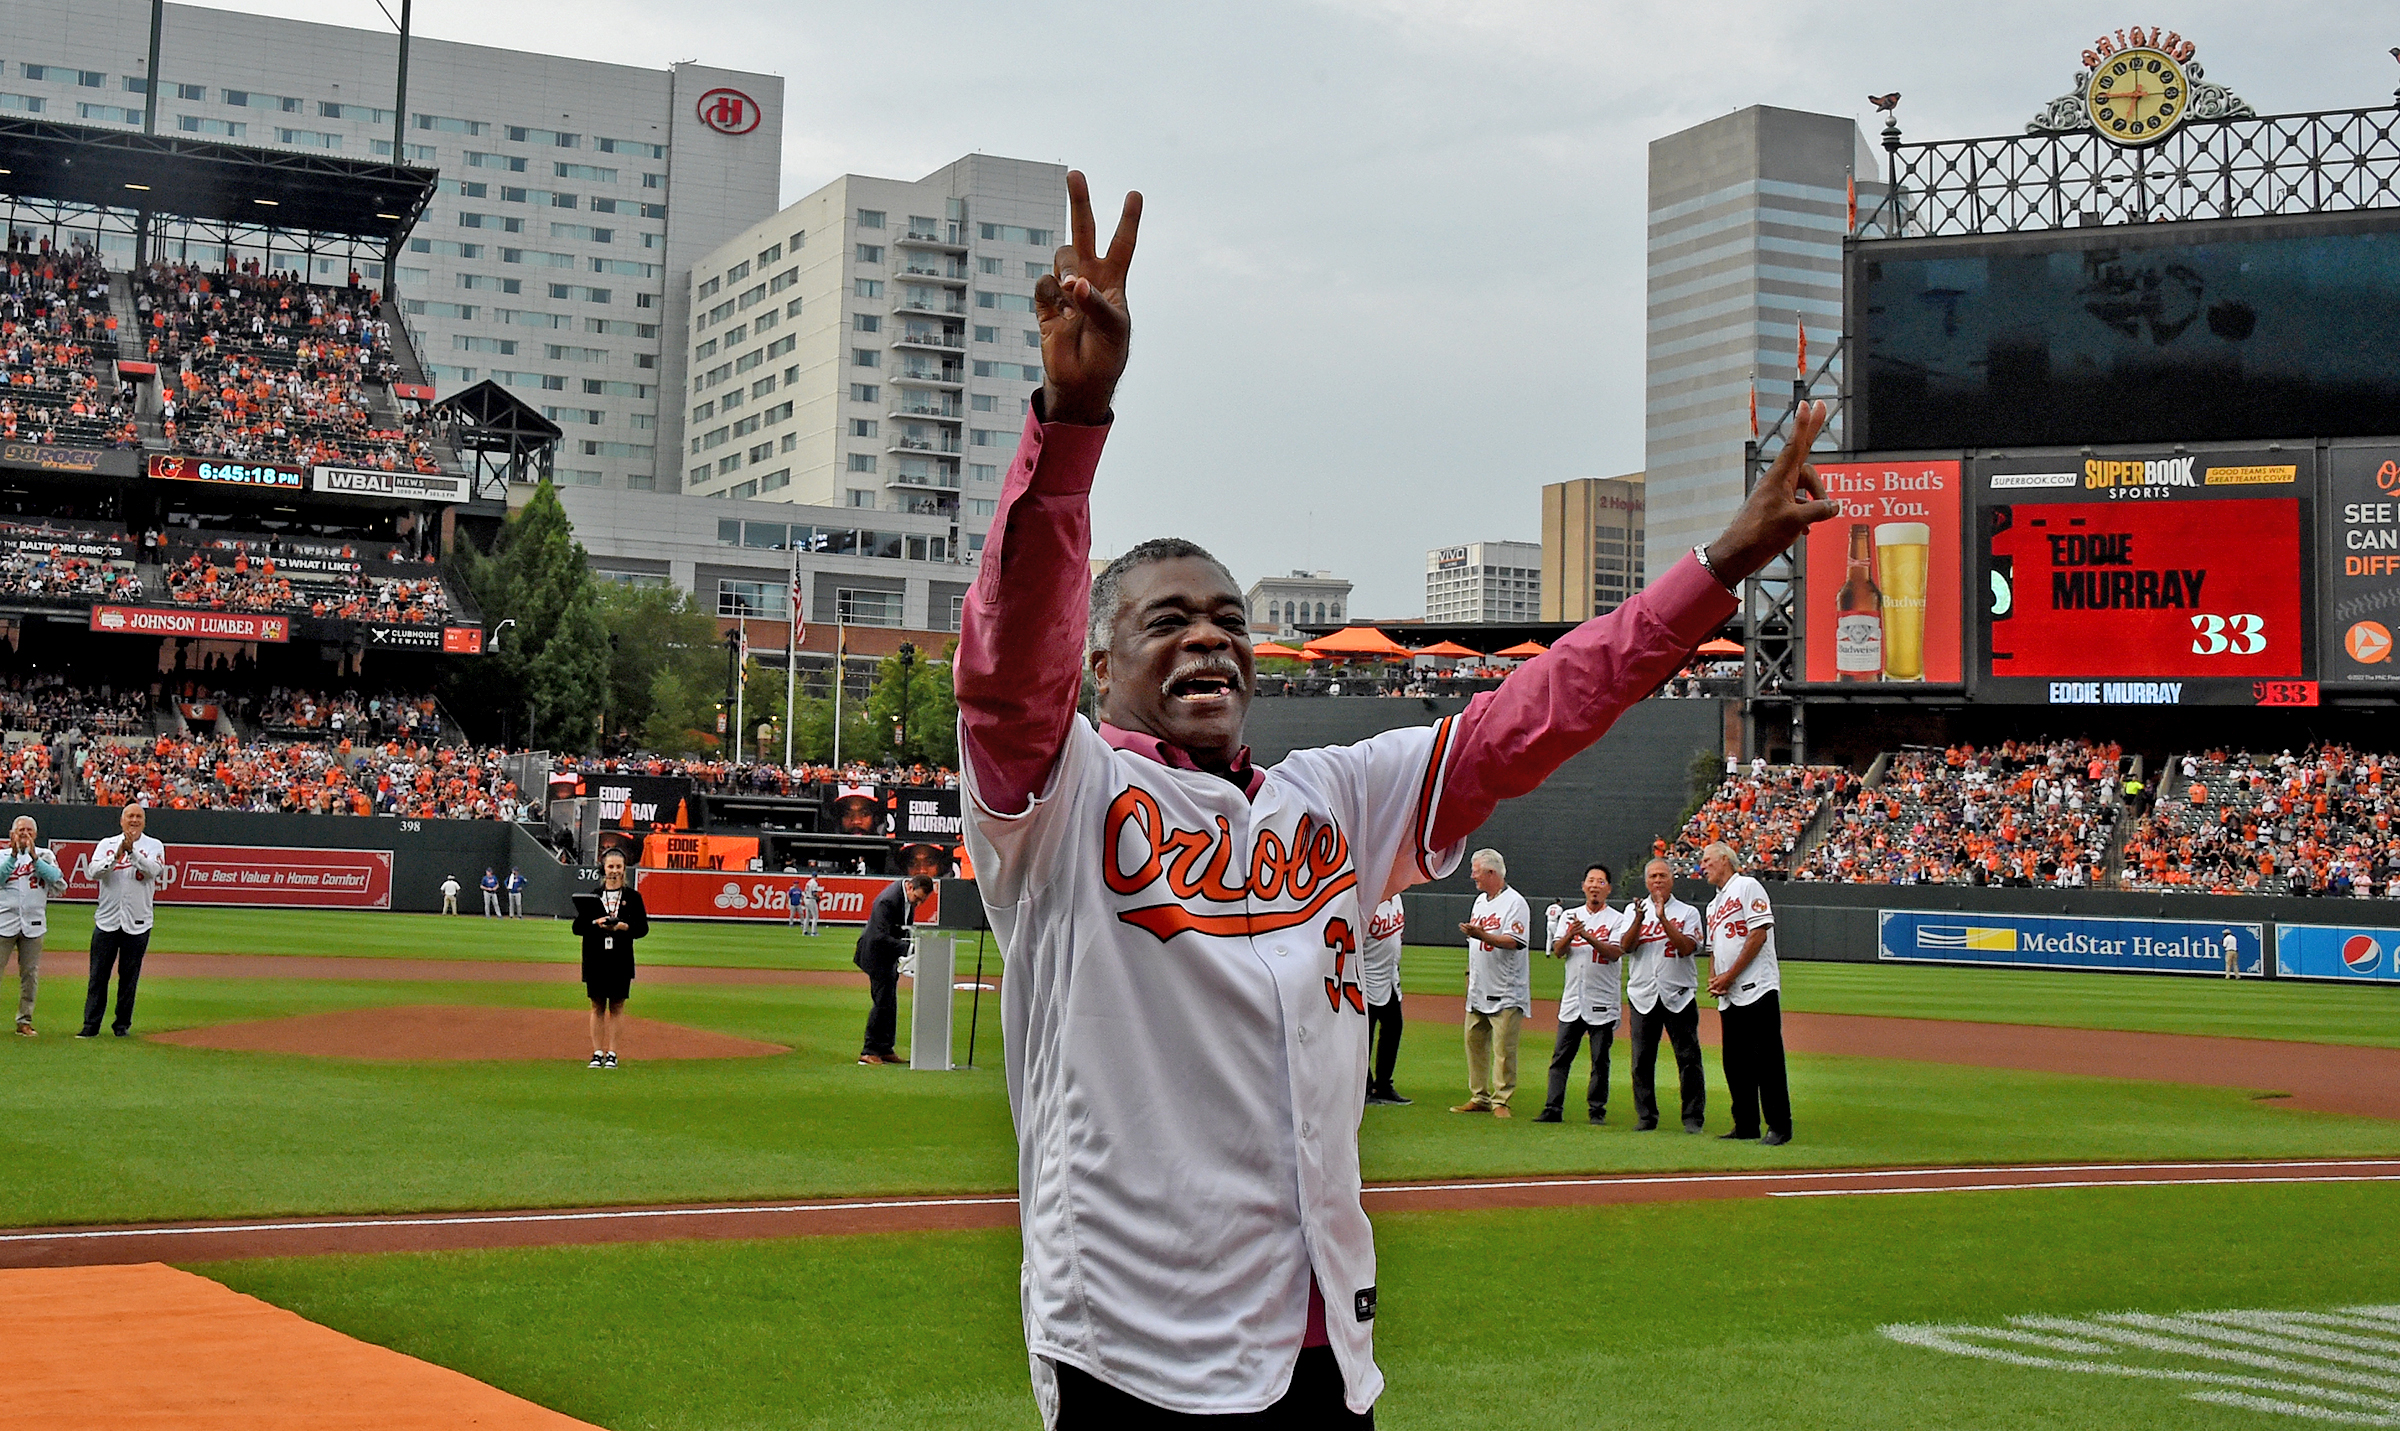 Baltimore was blessed to host Eddie Murray and Bubba Smith